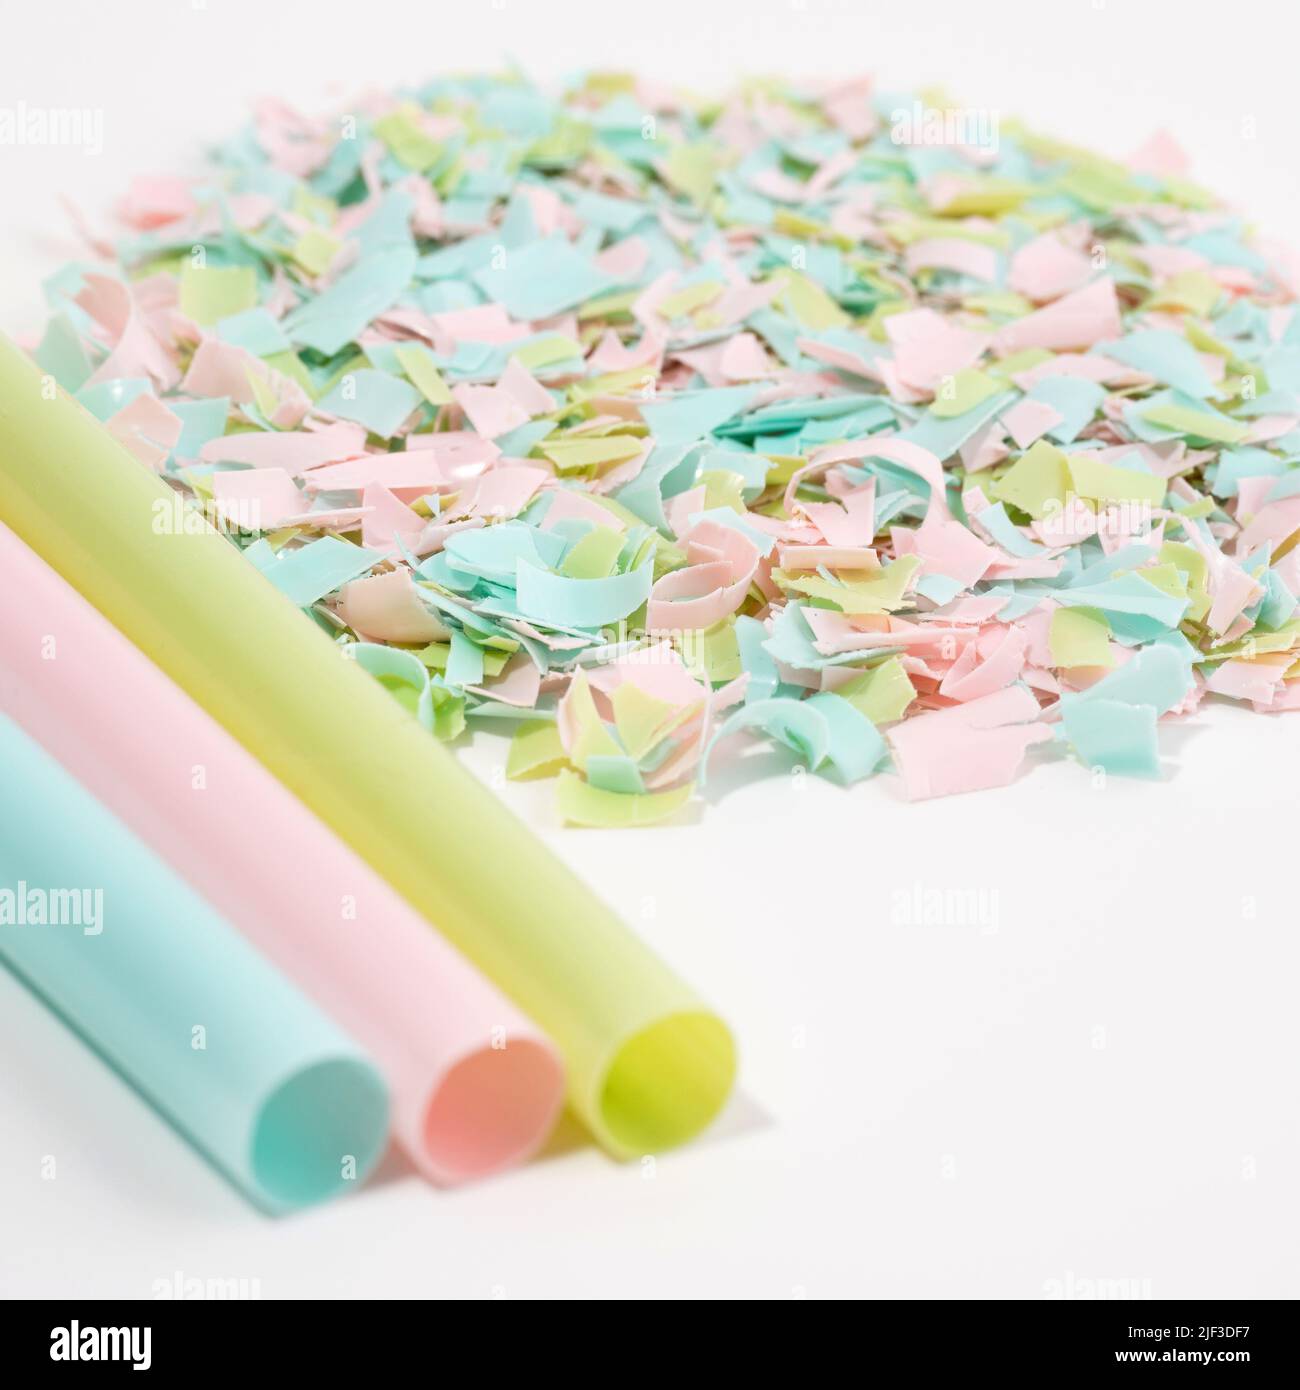 Drinking straws and microplastics on a white background. The idea of micro plastic pollution. Impact of microplastic on the food chain. Concept of env Stock Photo